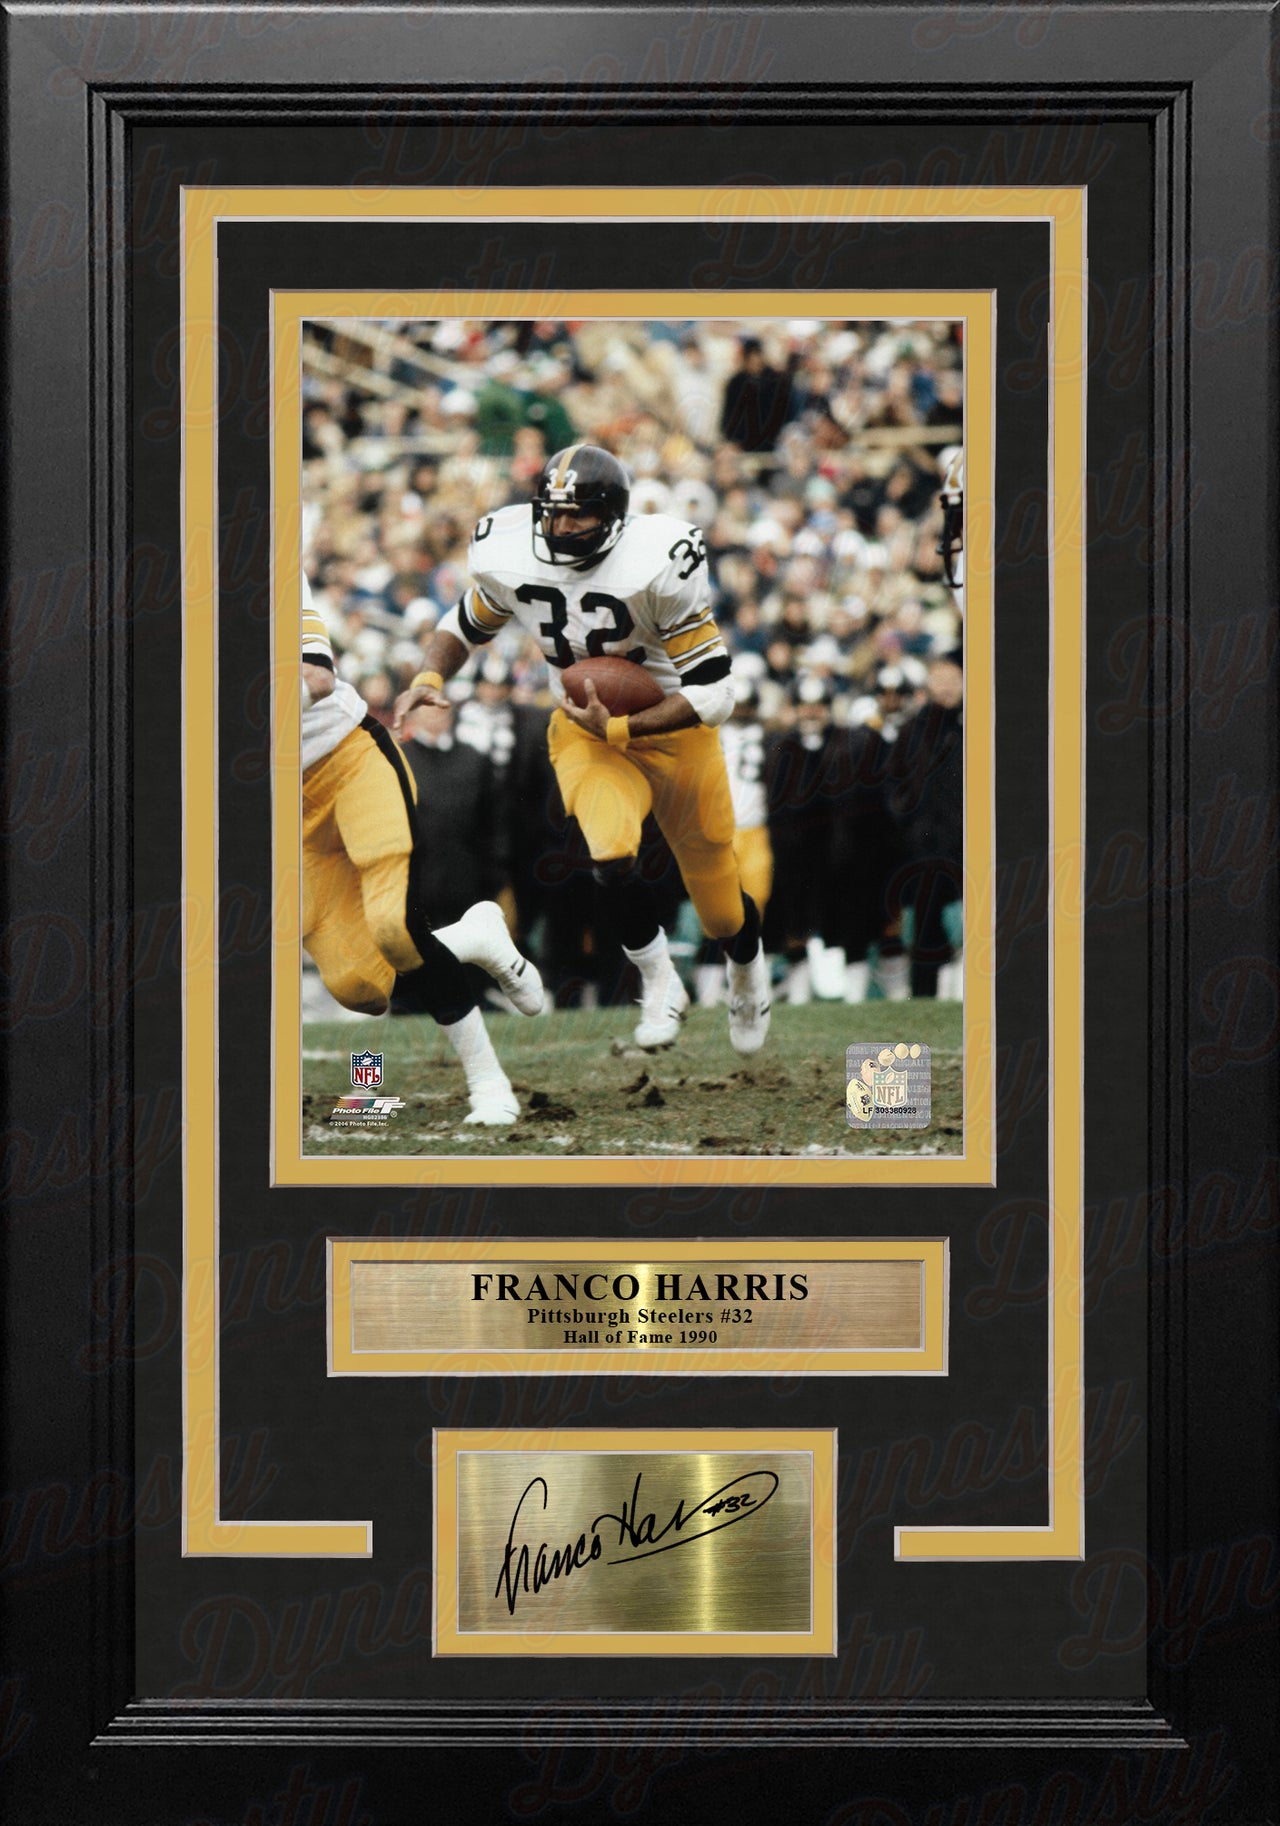 Franco Harris in Action Pittsburgh Steelers 8" x 10" Framed Photo with Engraved Autograph - Dynasty Sports & Framing 